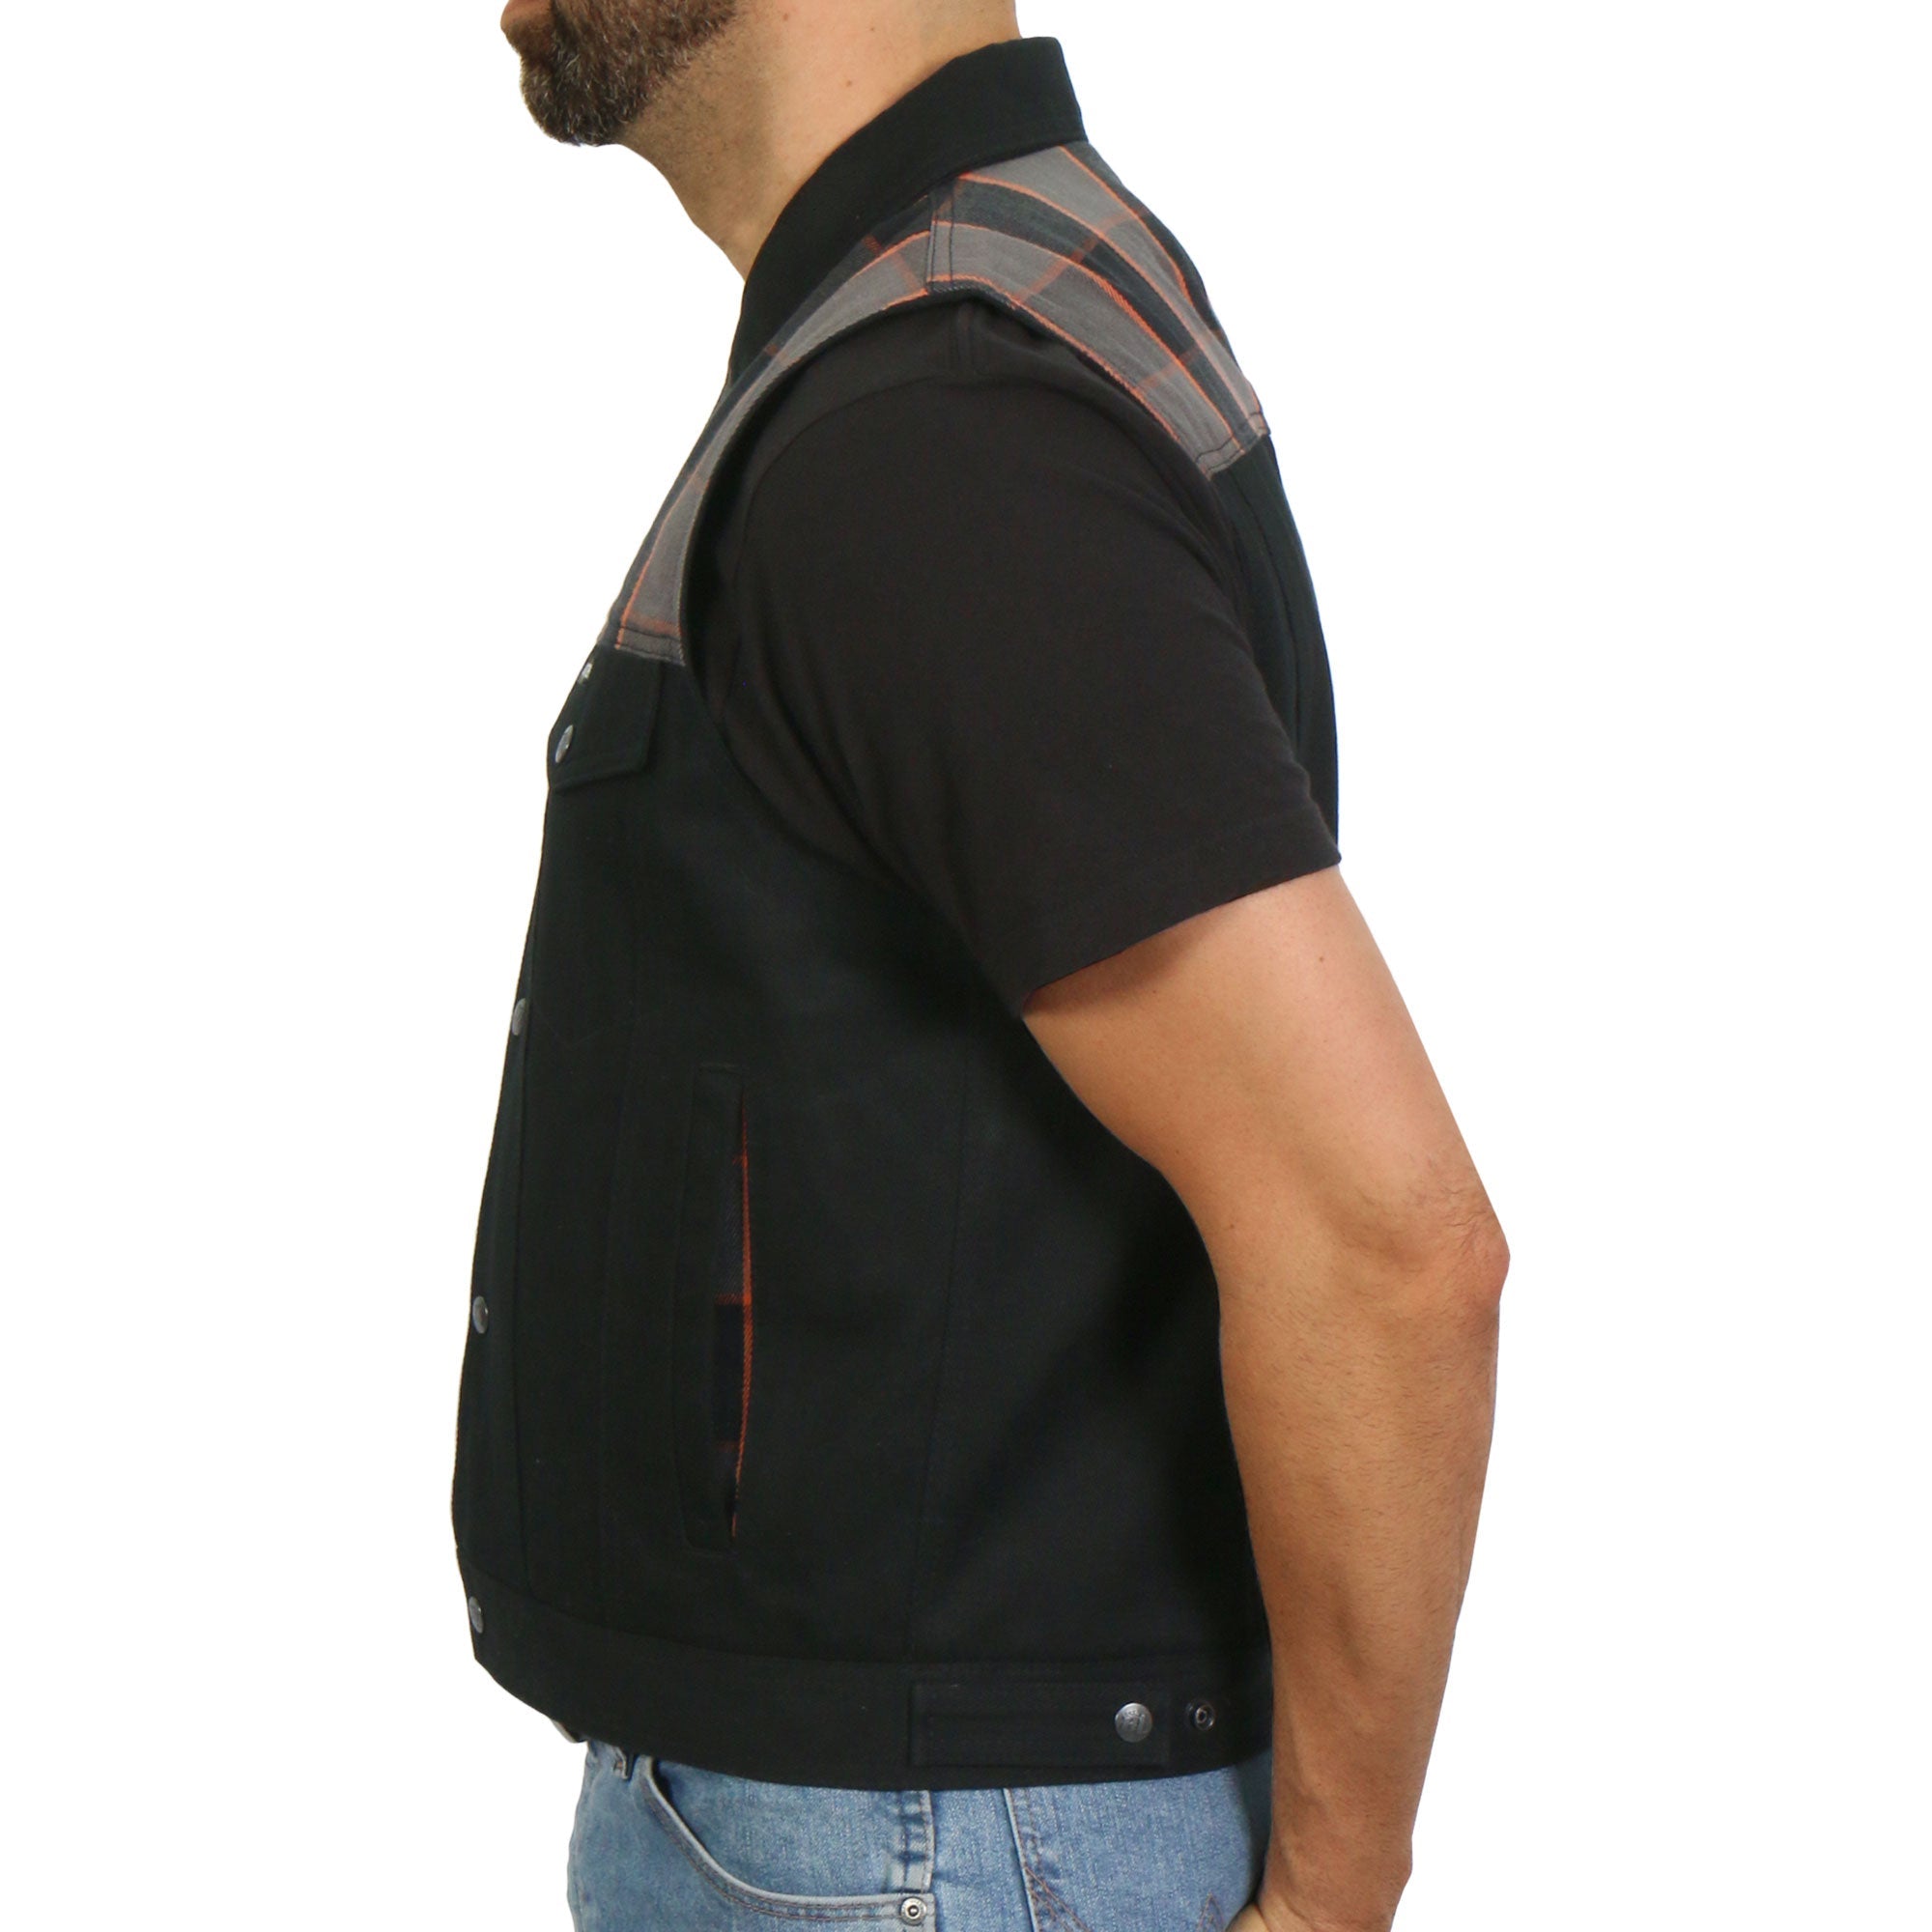 Hot Leathers Men’s Denim and Flannel Conceal Carry Vest